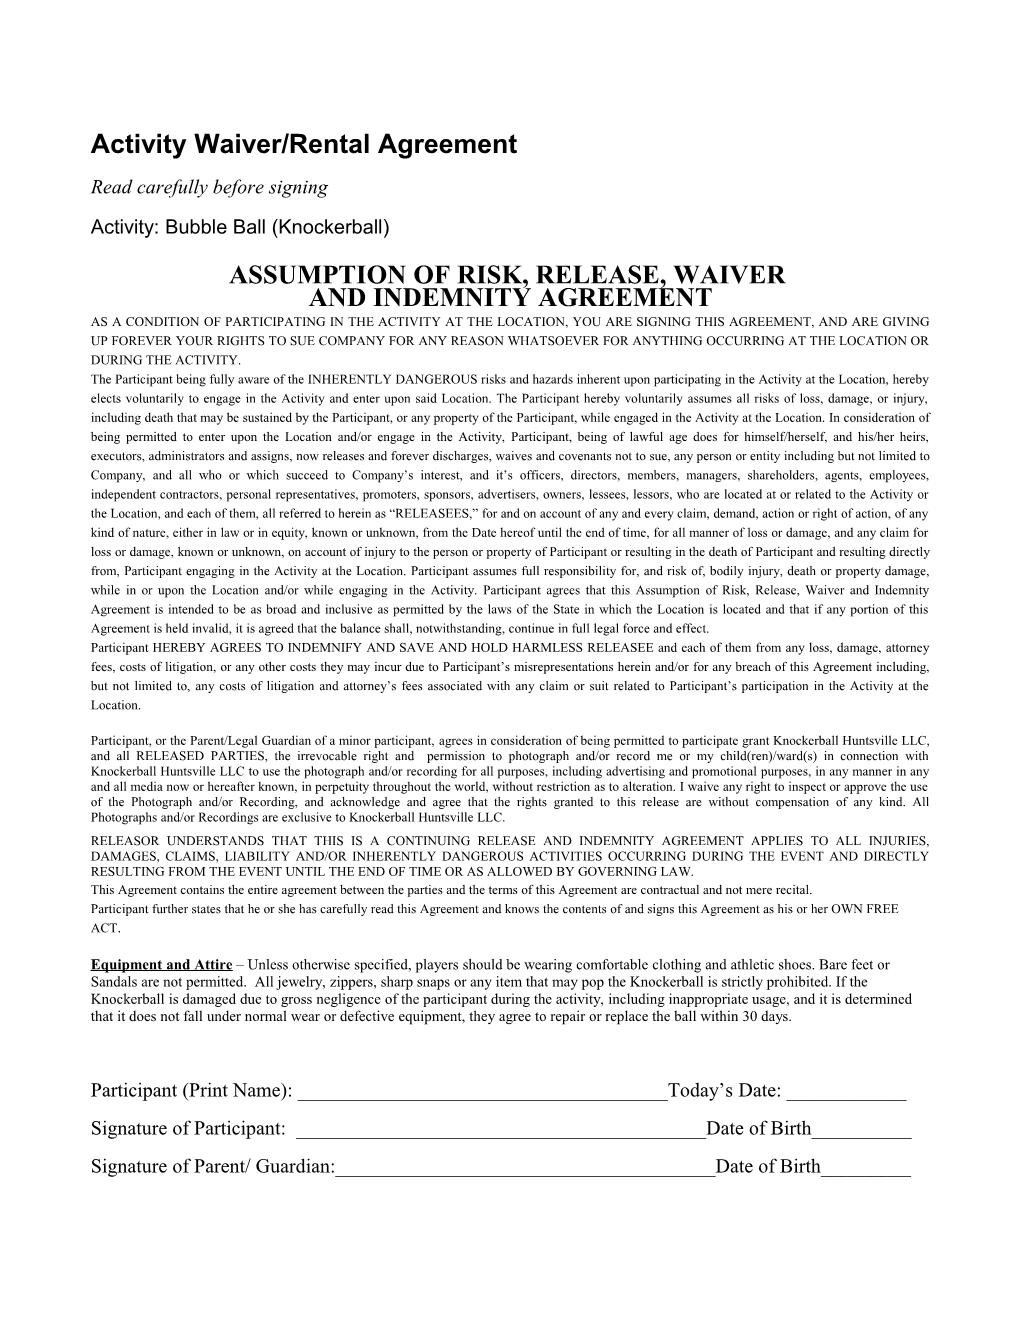 Activity Waiver/Rental Agreement